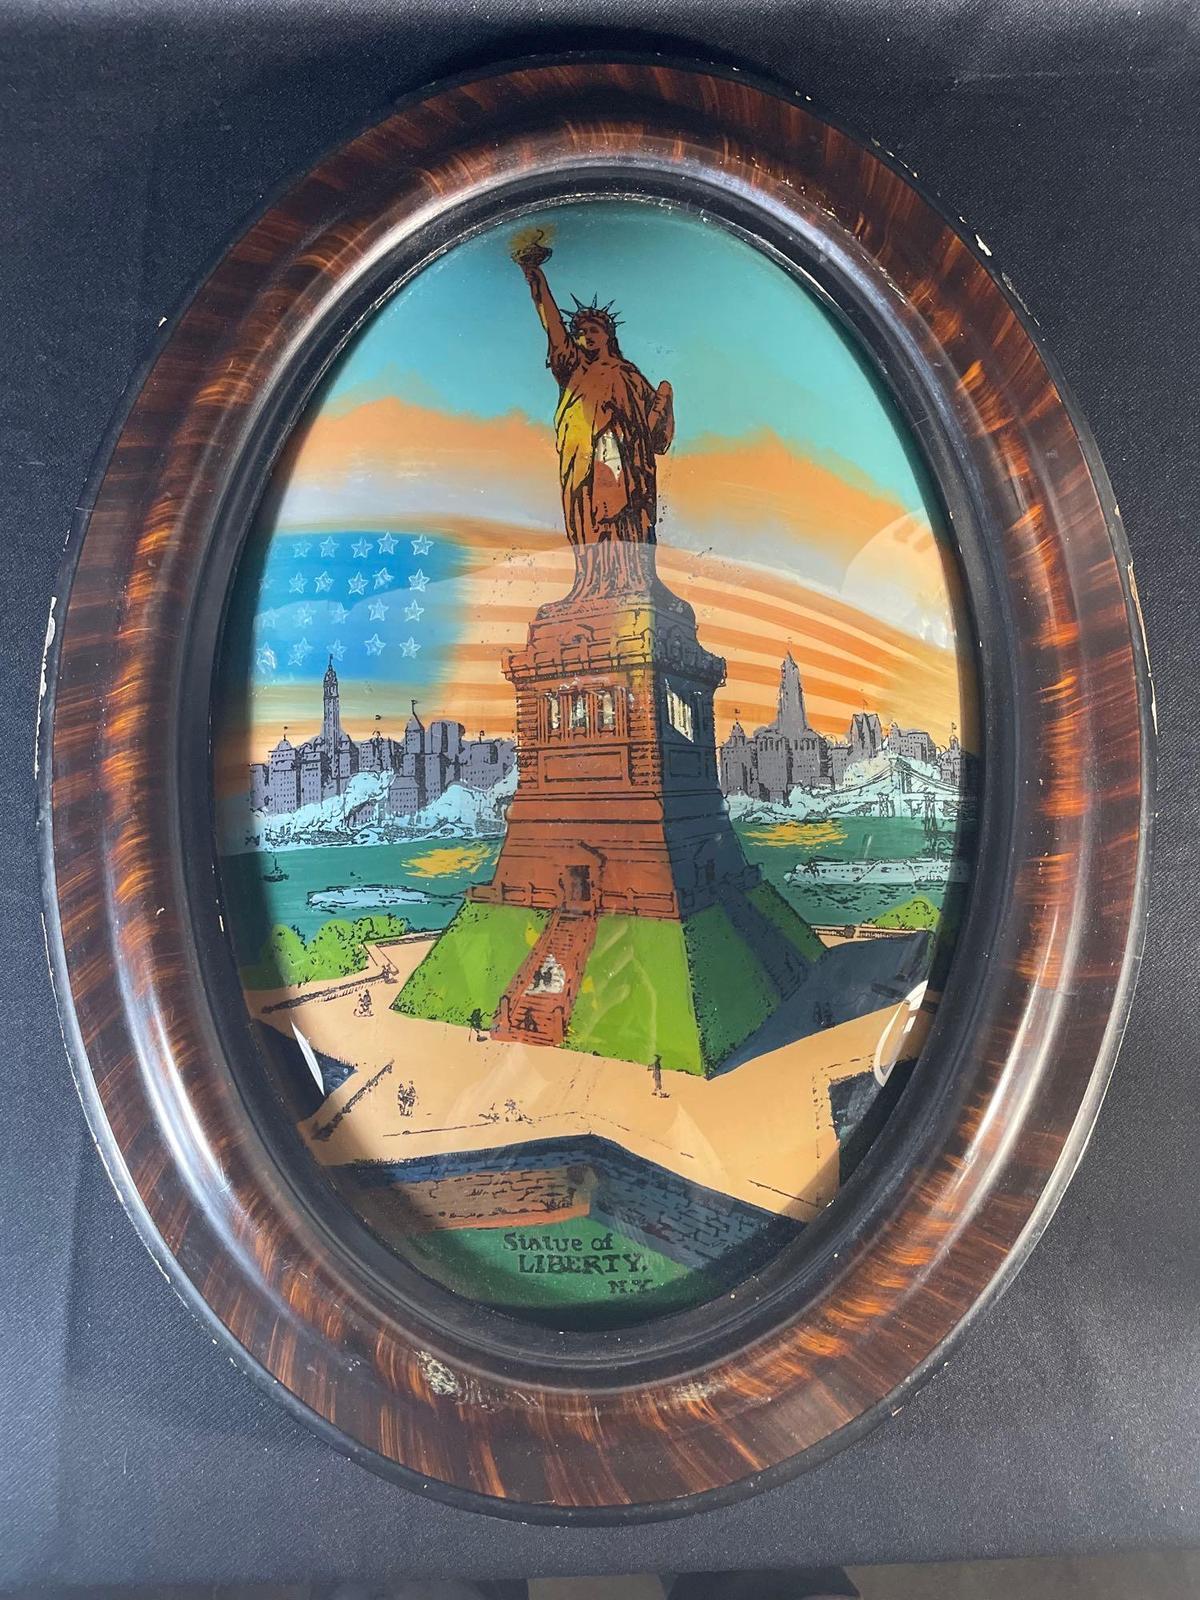 The statue of liberty N.Y. glass picture framed